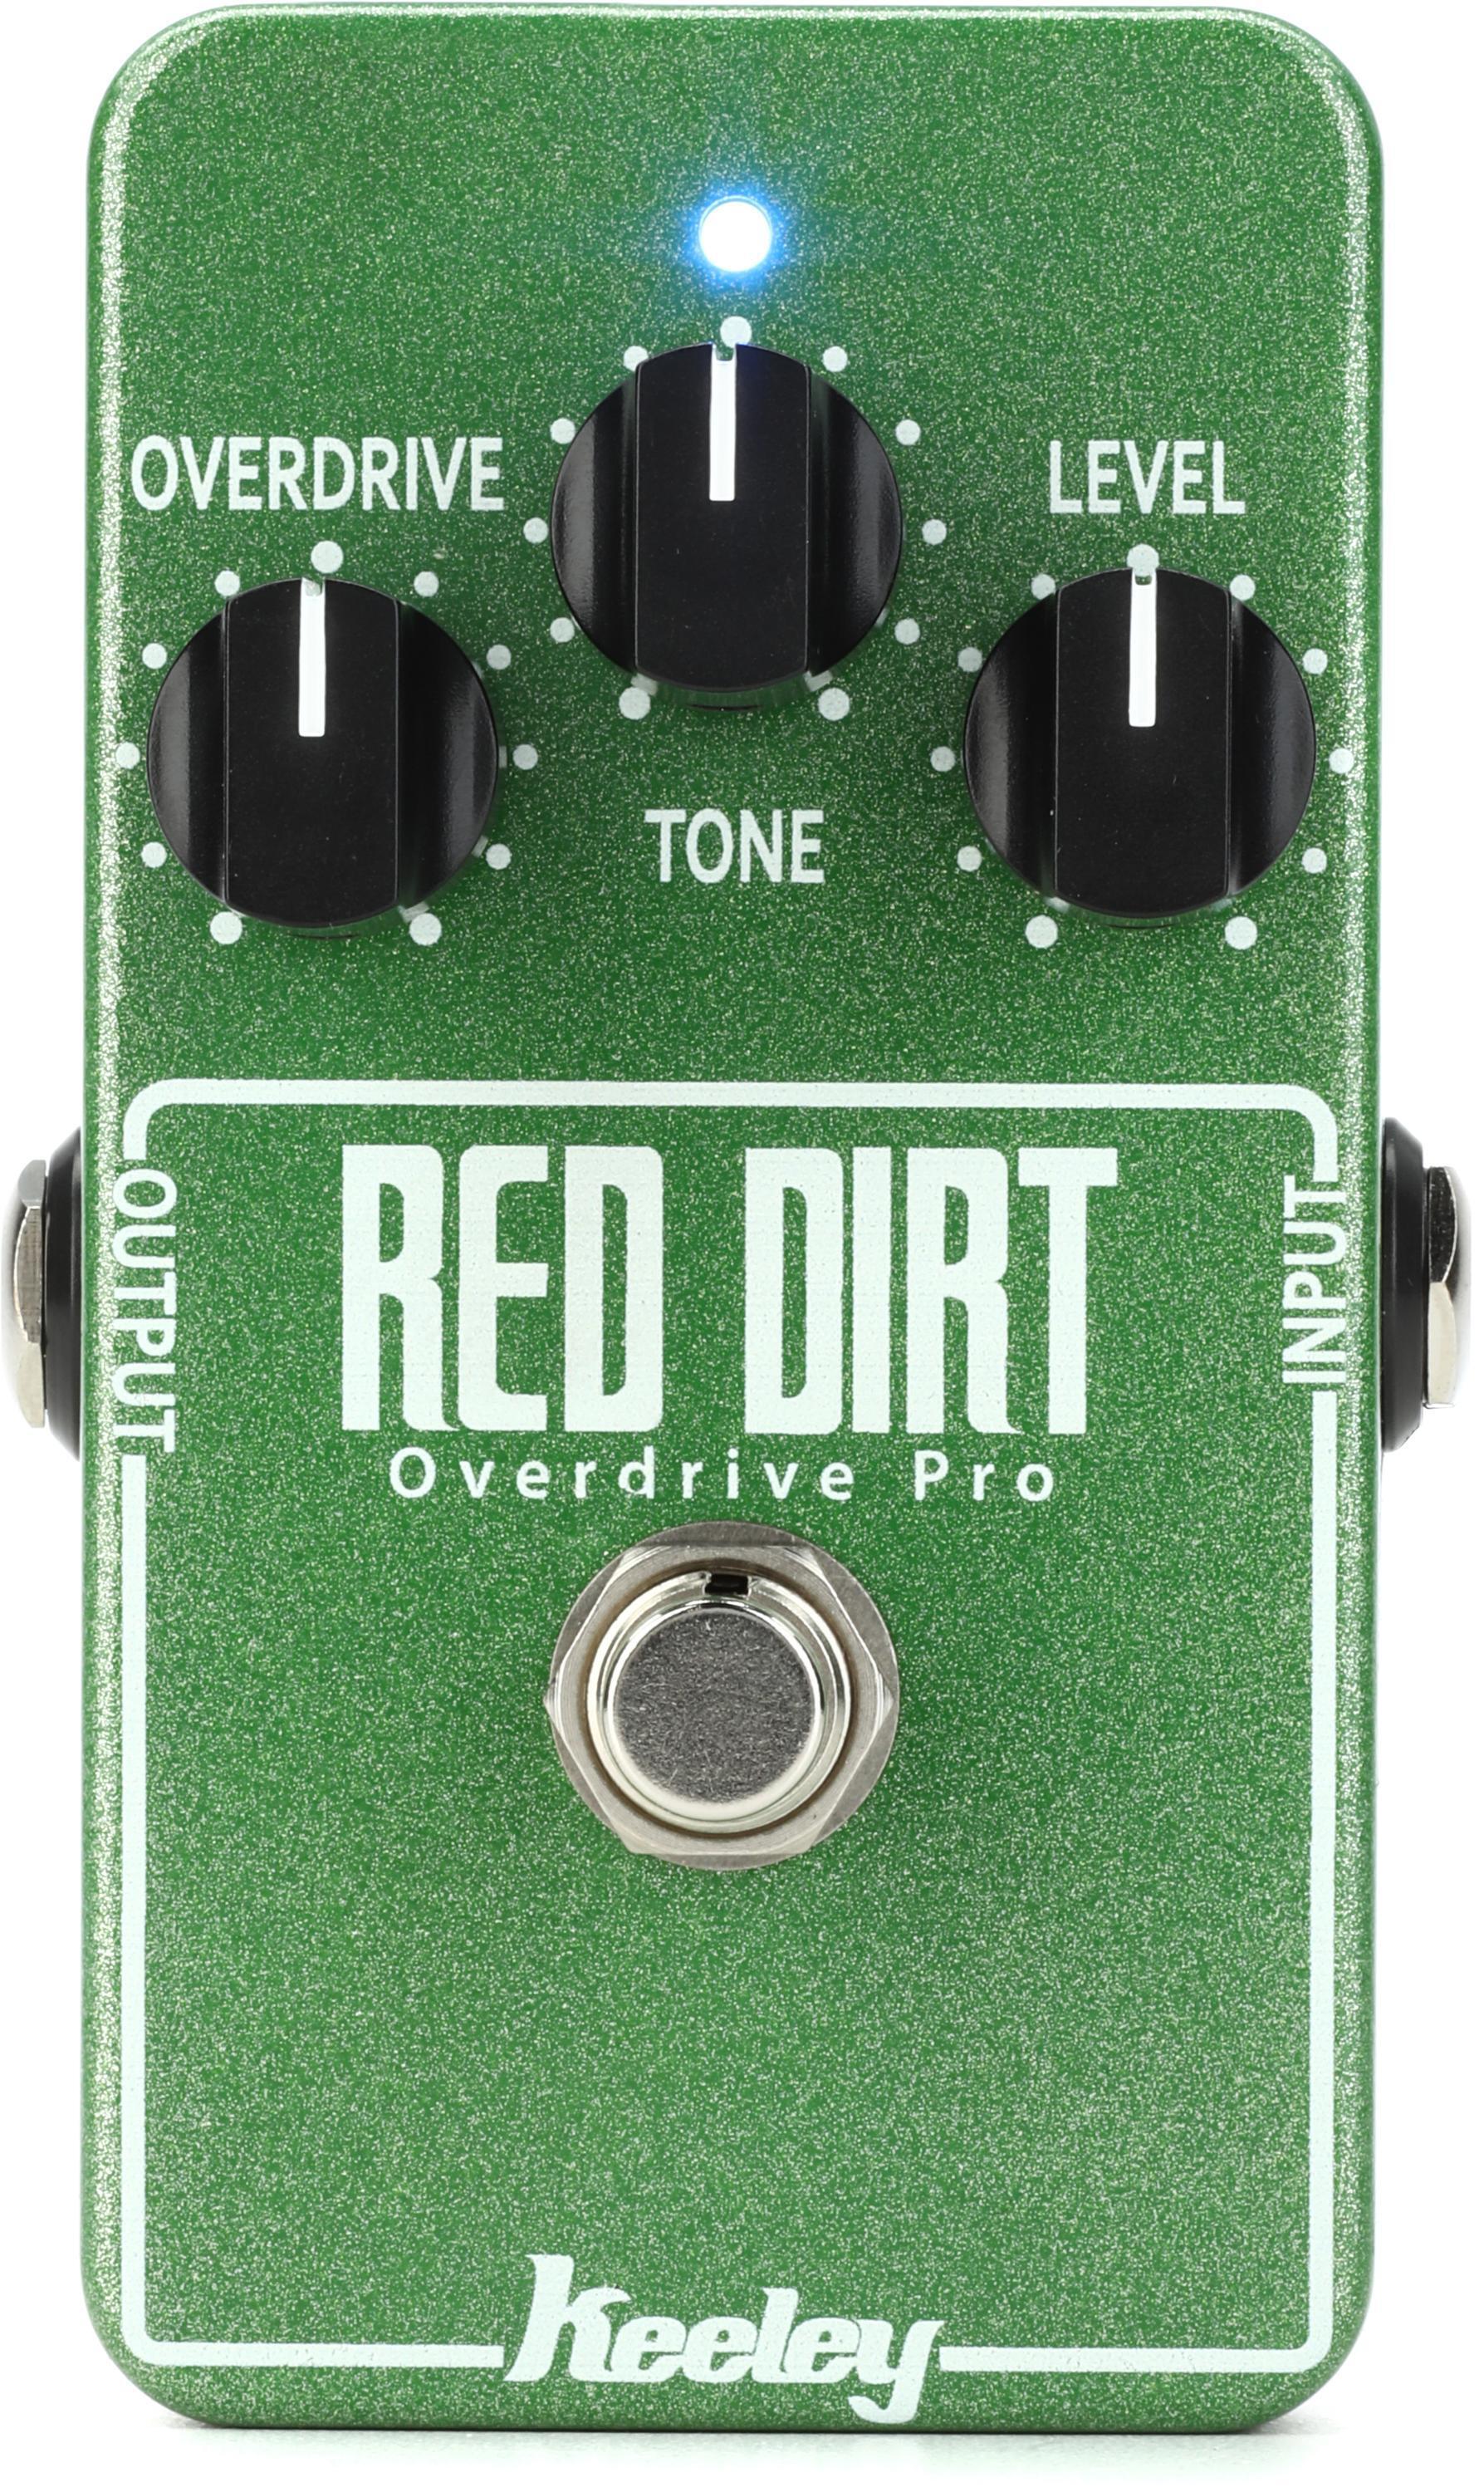 Keeley Red Dirt Overdrive Germanium Overdrive Pedal - Green Sparkle,  Sweetwater Exclusive